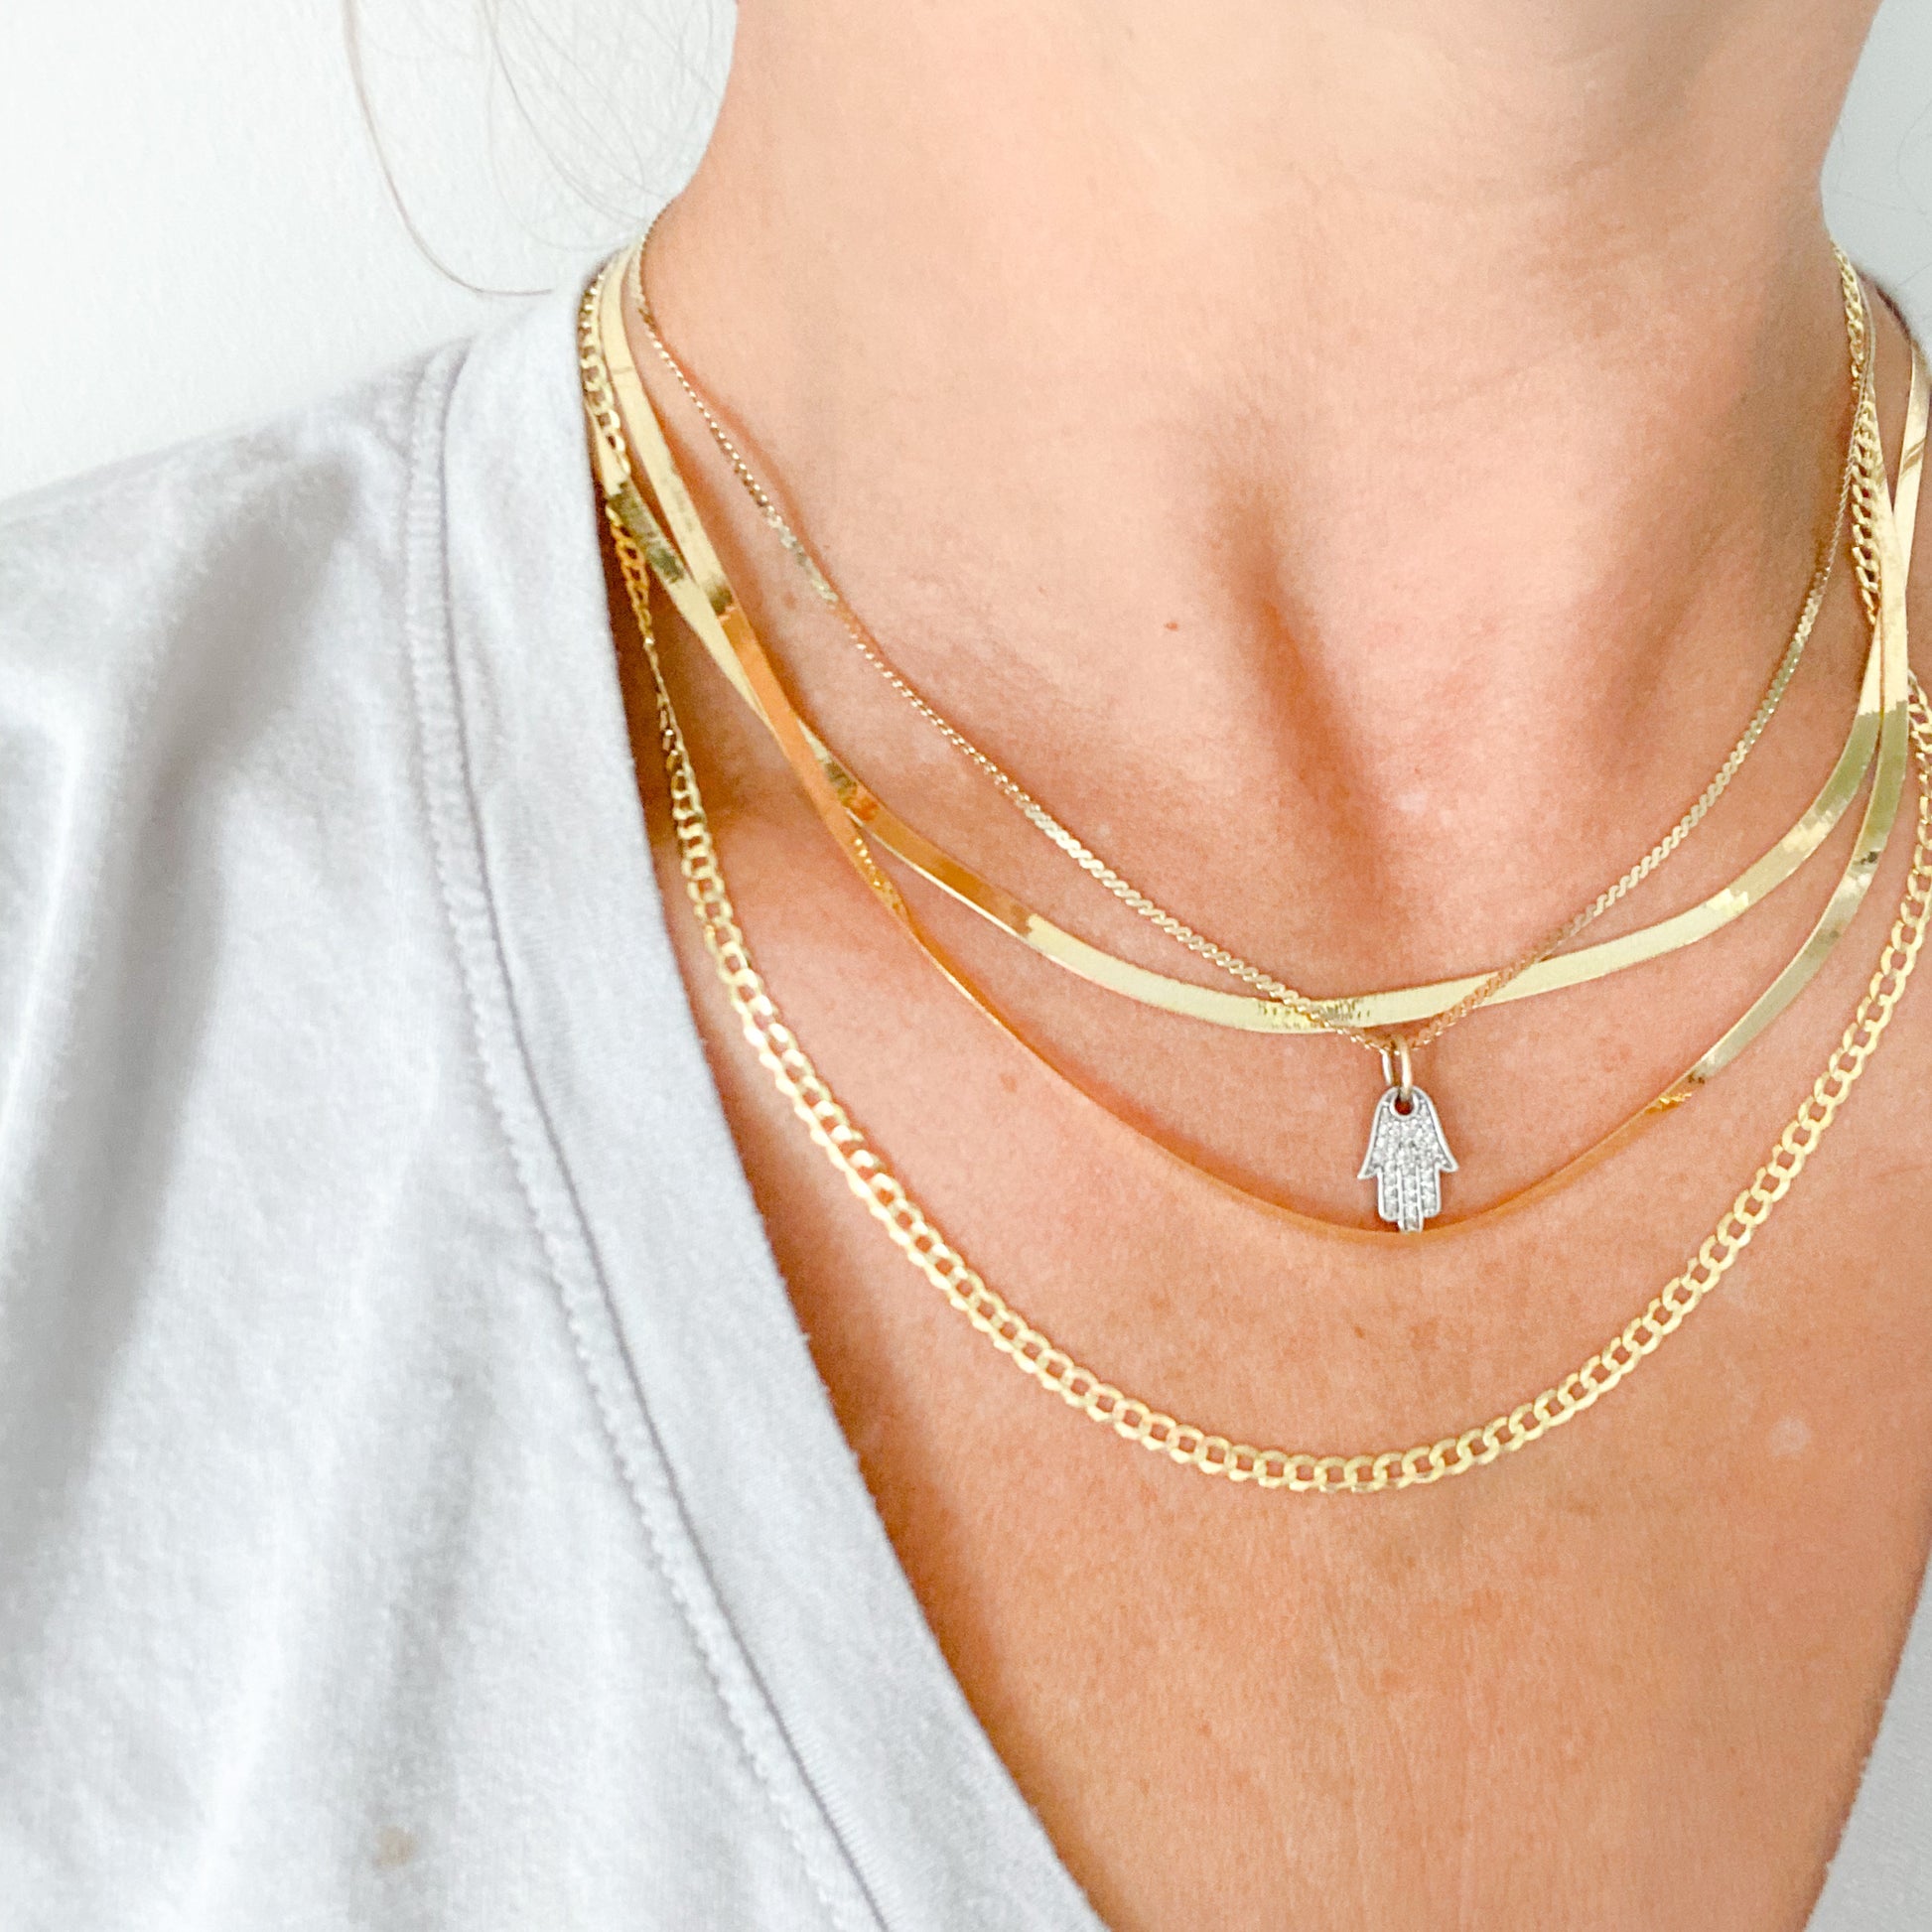 Tommy 14K Gold Chain Necklace - BelleStyle